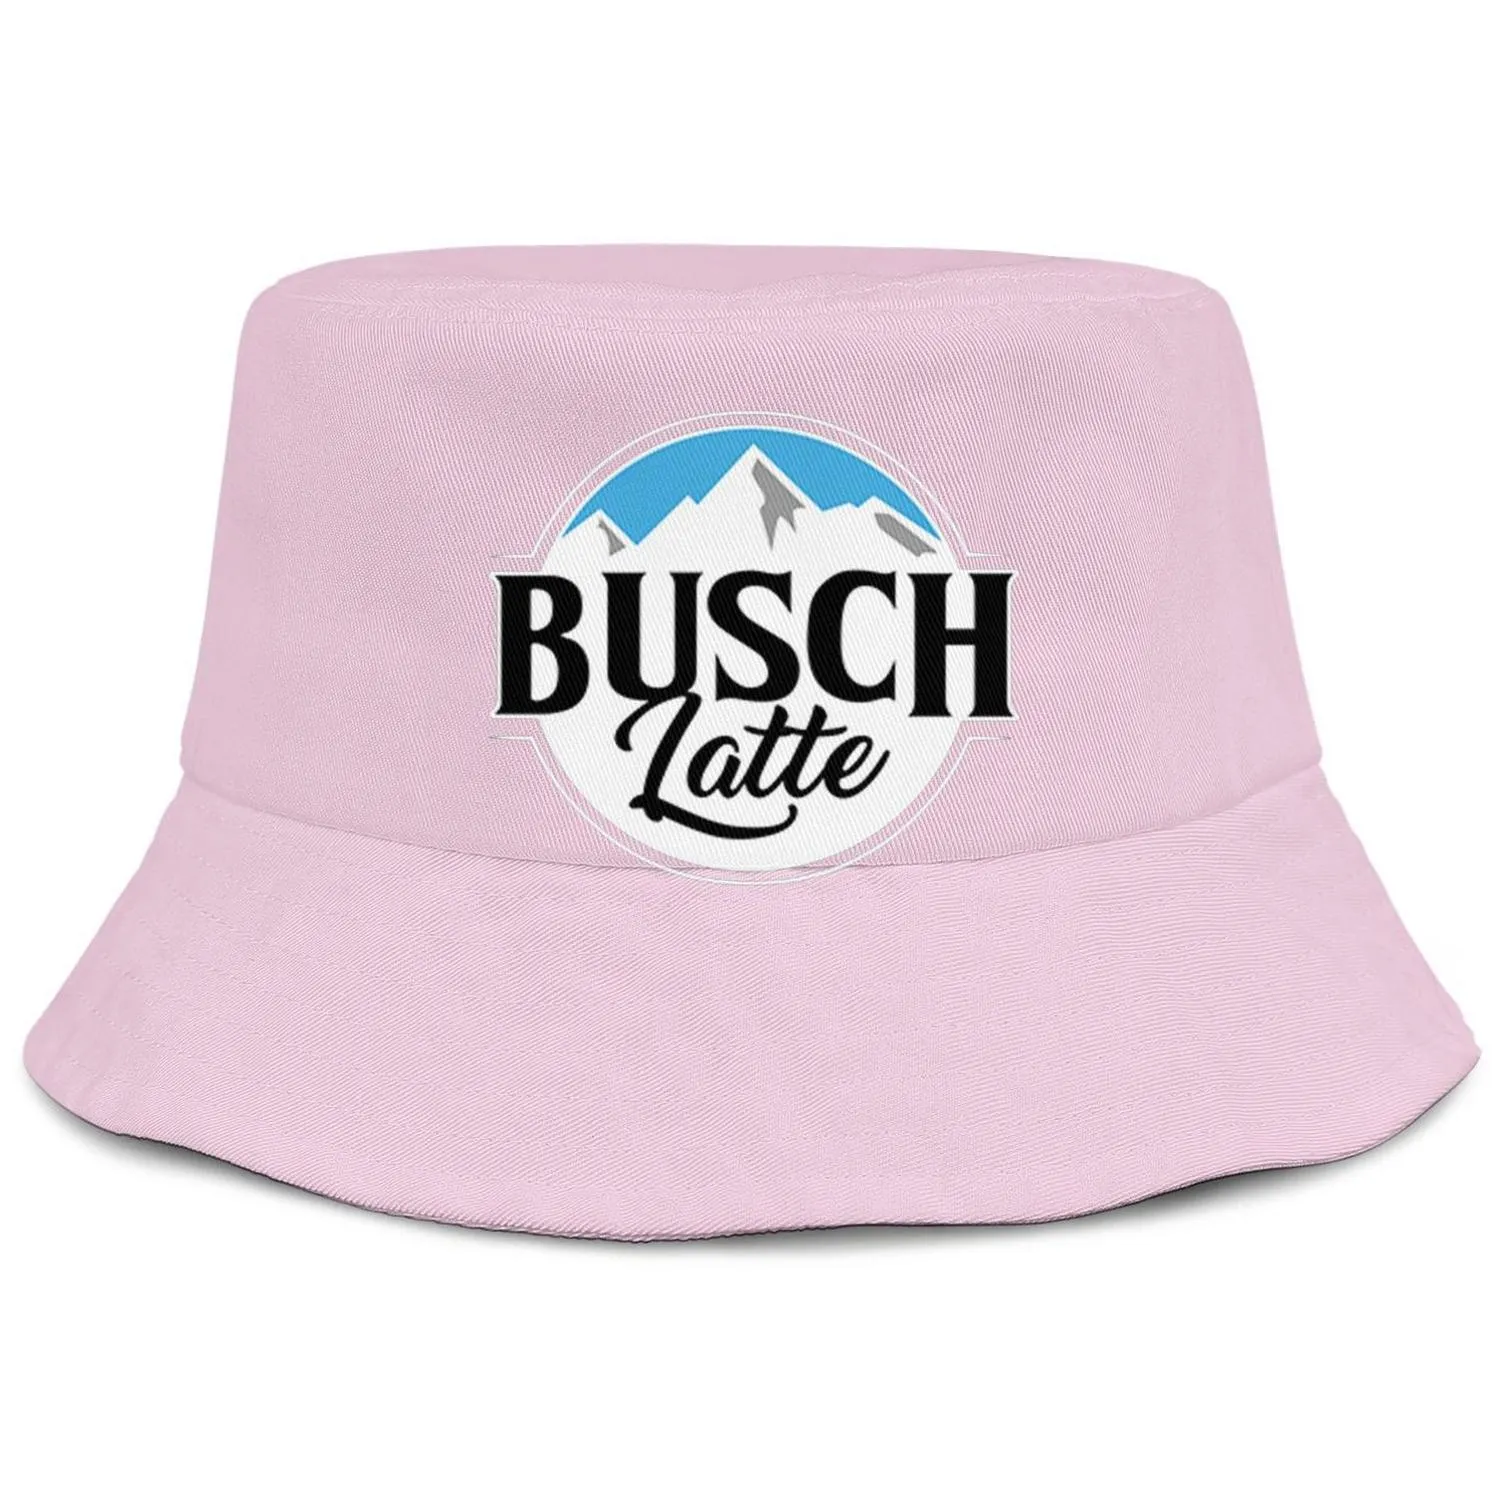 Busch Light Beer logo mens and womens buckethat cool youth bucket baseballcap light blue adge white Latte So Much4707196